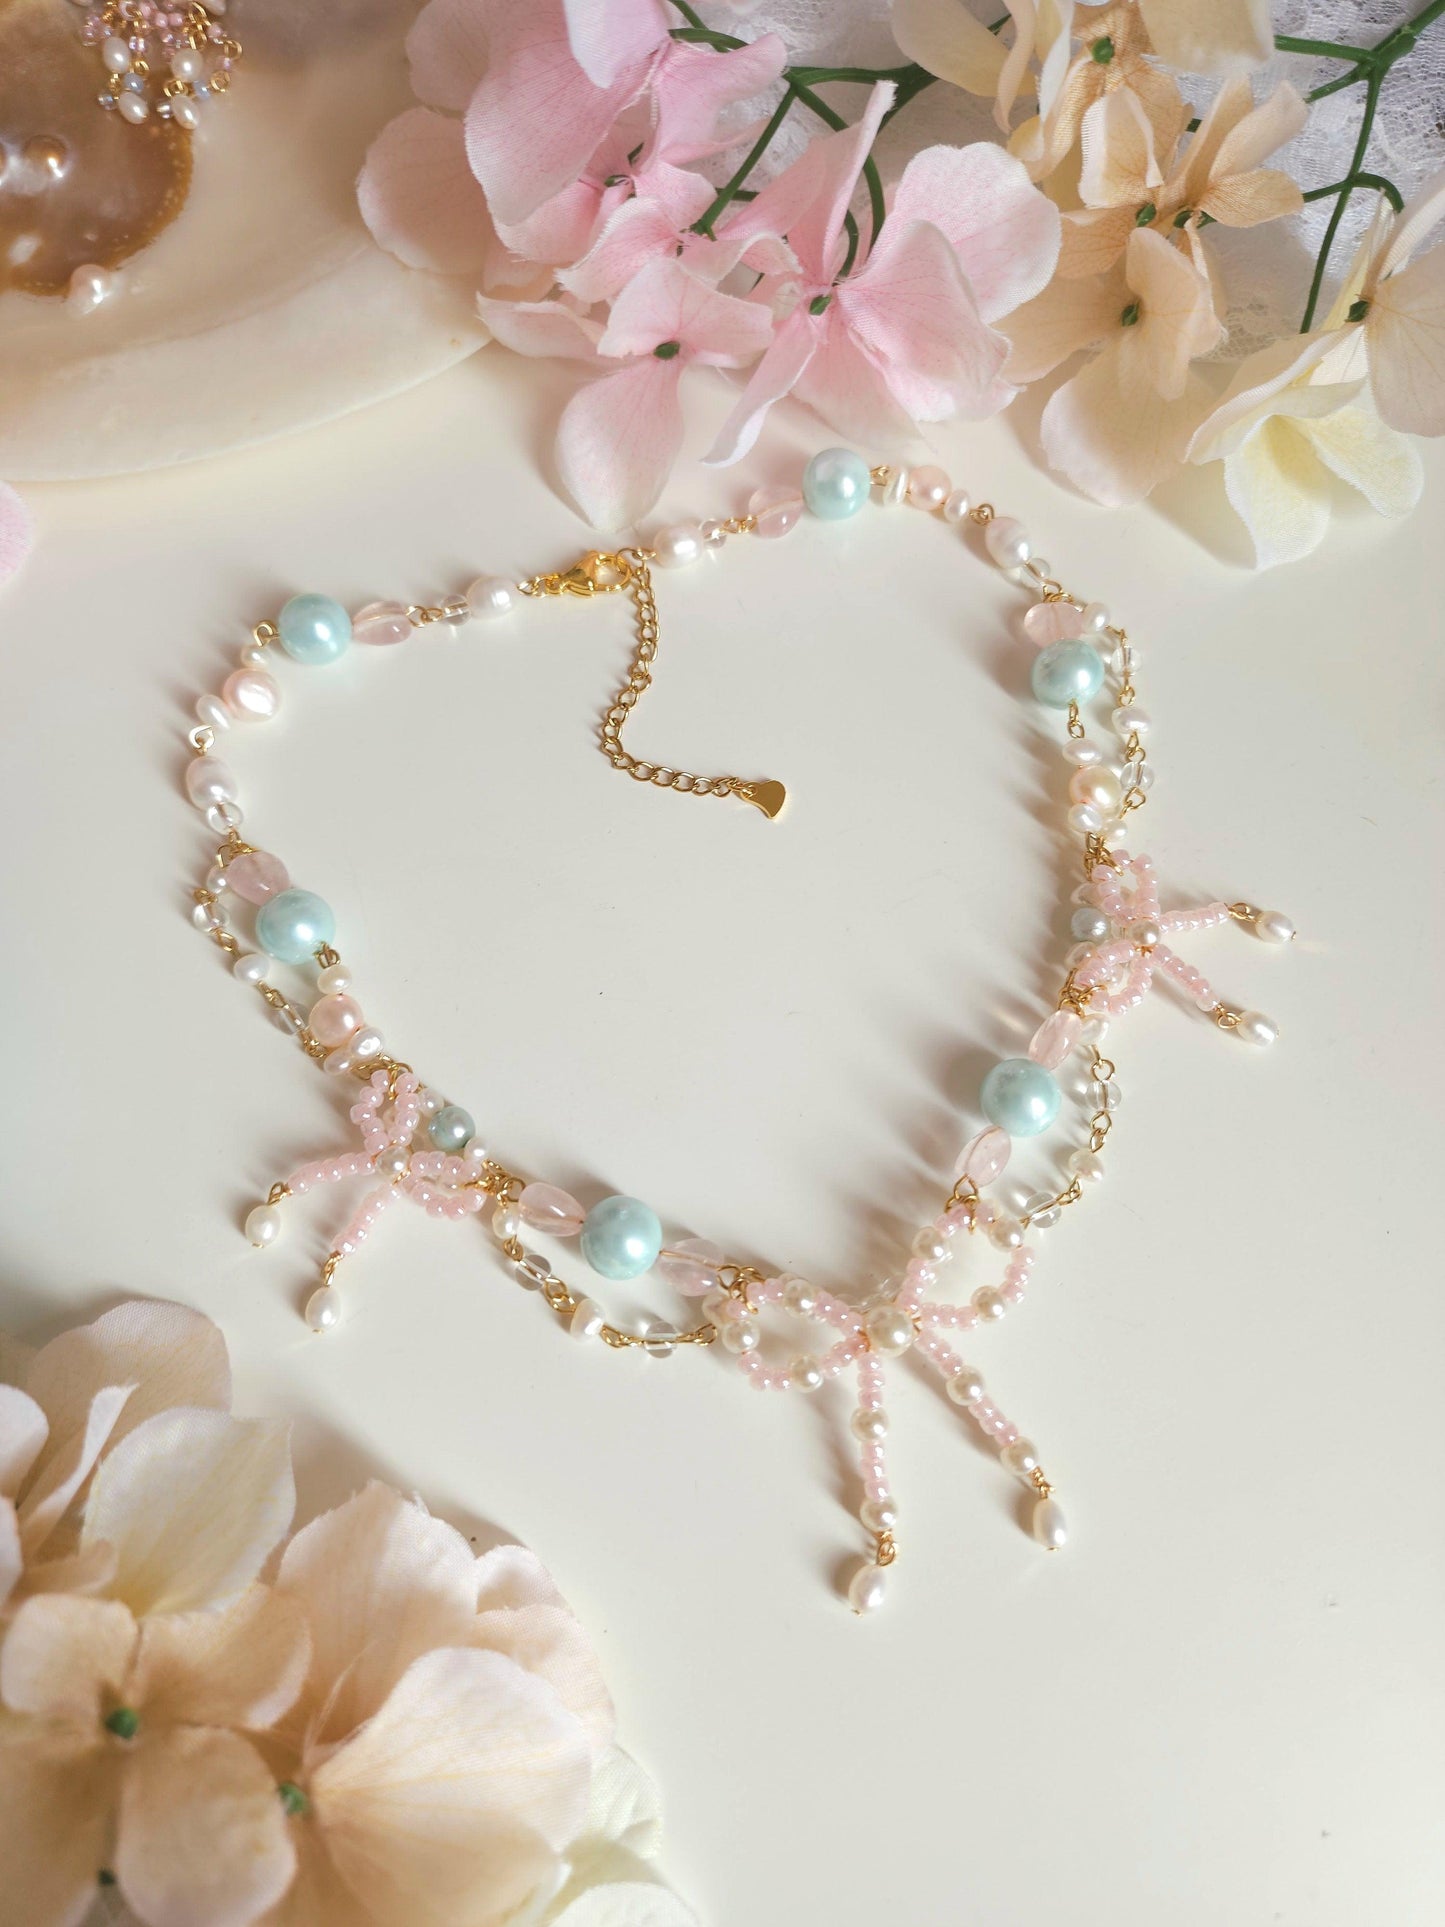 Dreamy Tides Ribbon Necklace - By Cocoyu